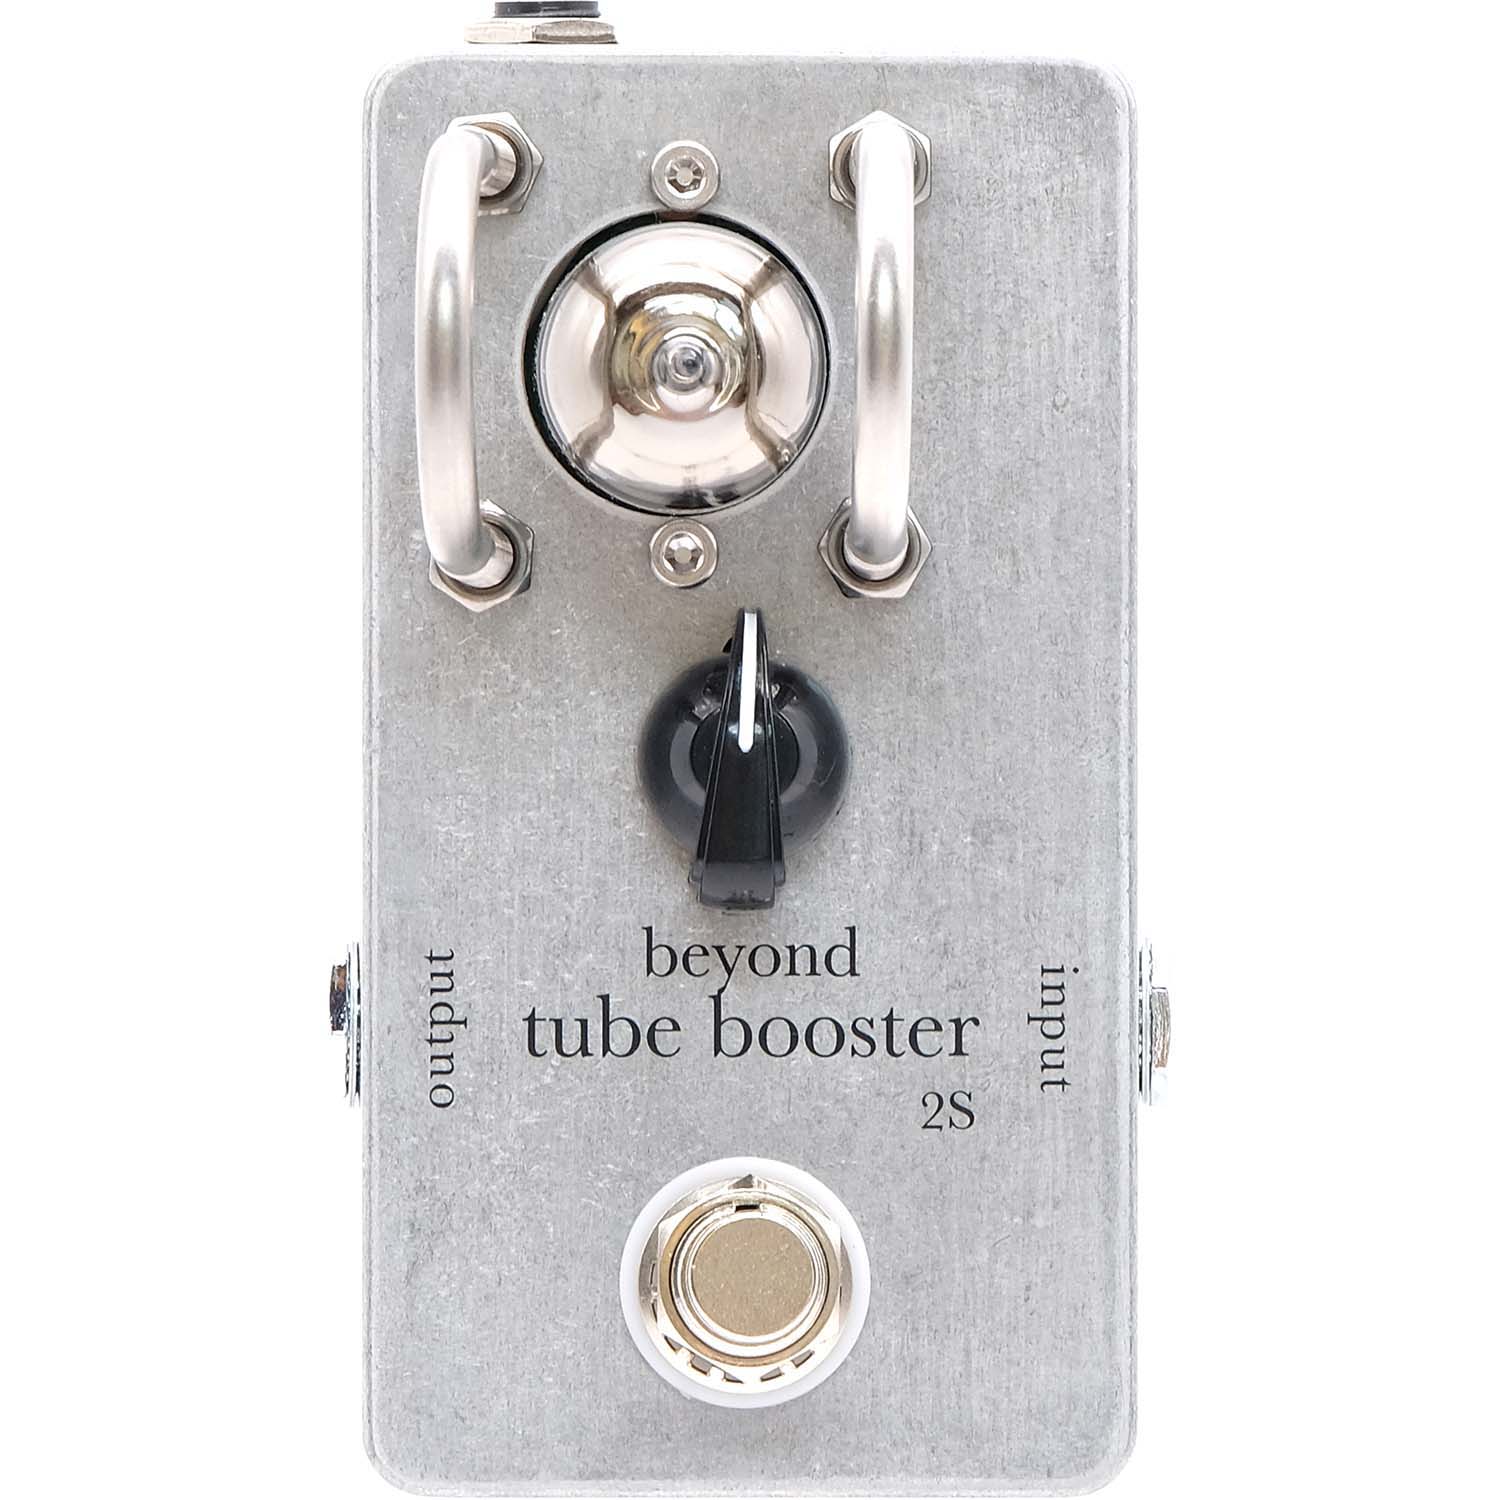 beyond tube booster 2s image